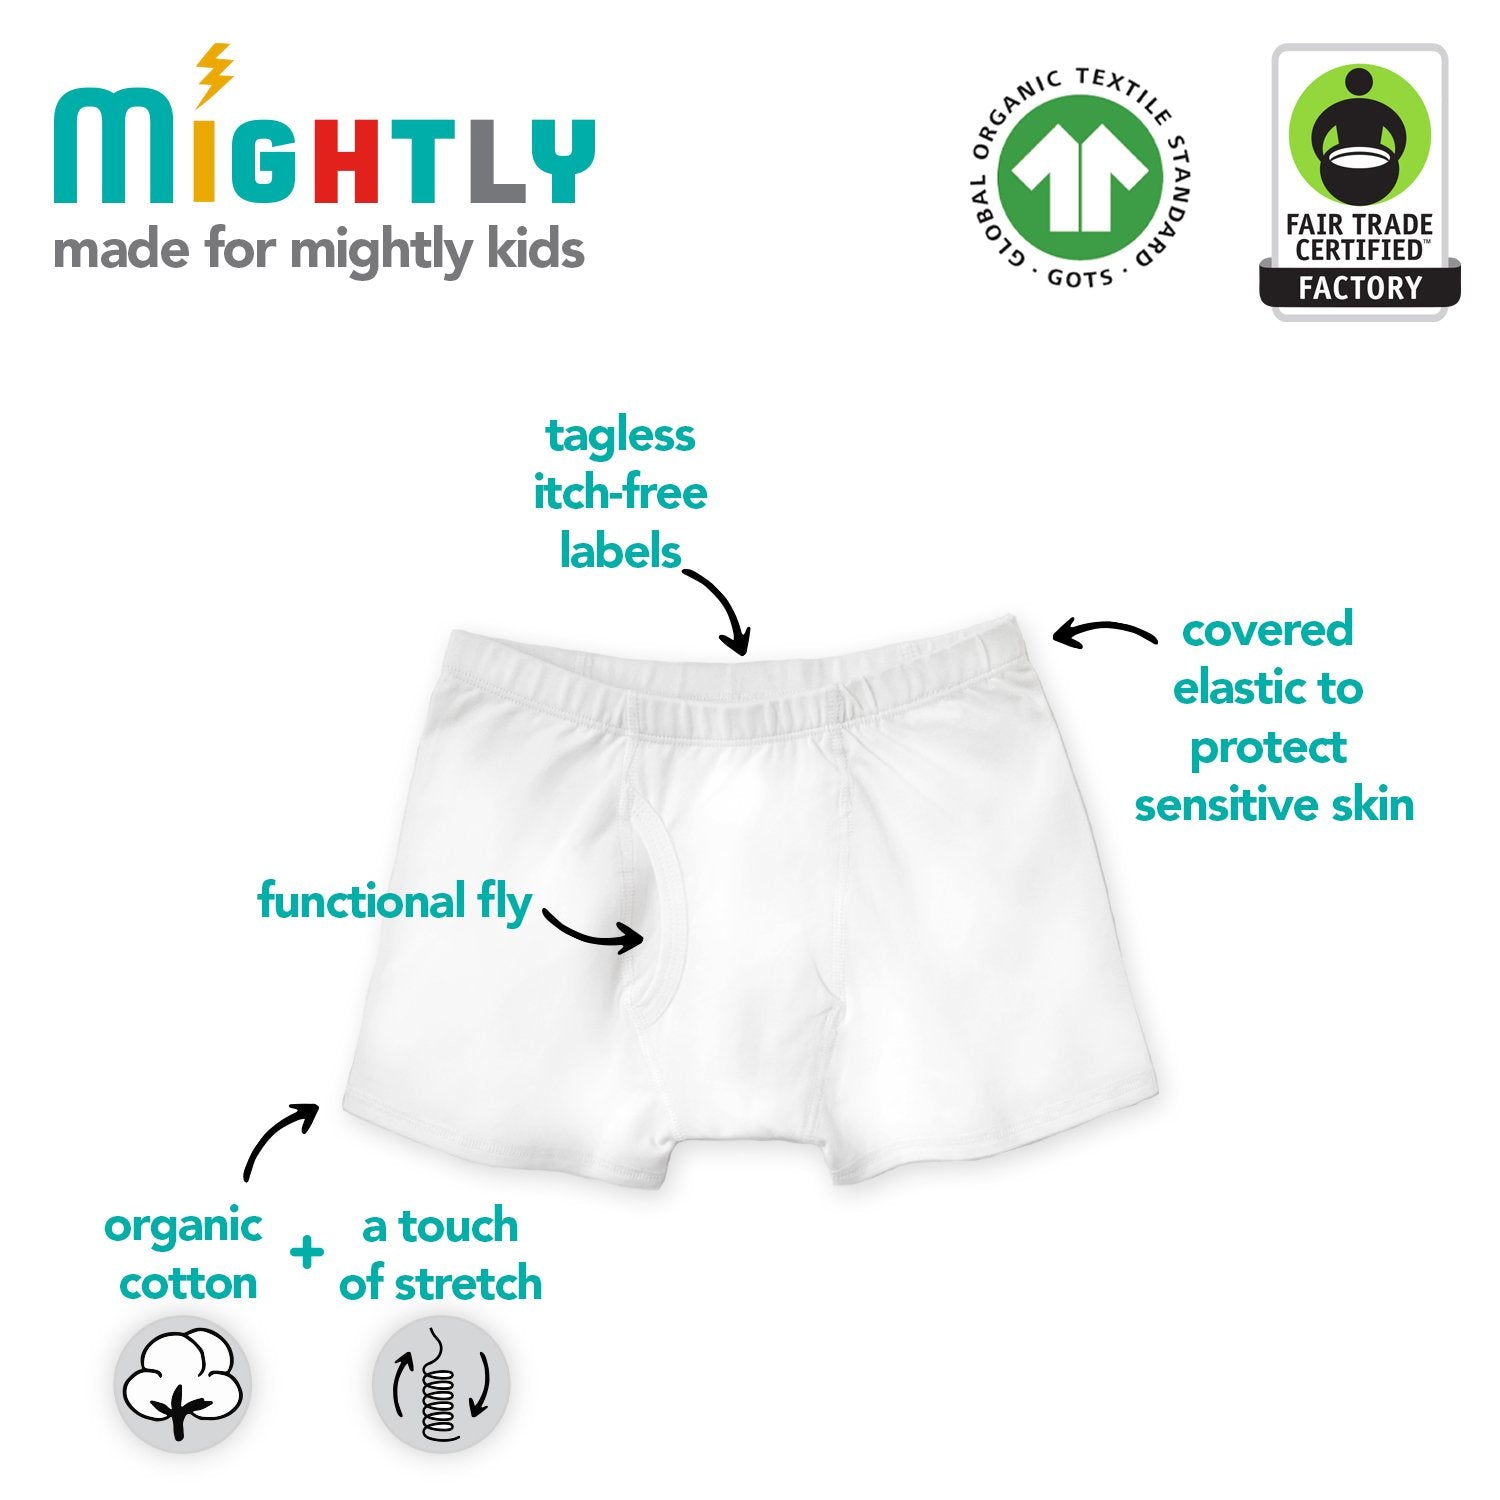 Adorable boys boxer briefs set - Comfortable and stylish for your little one